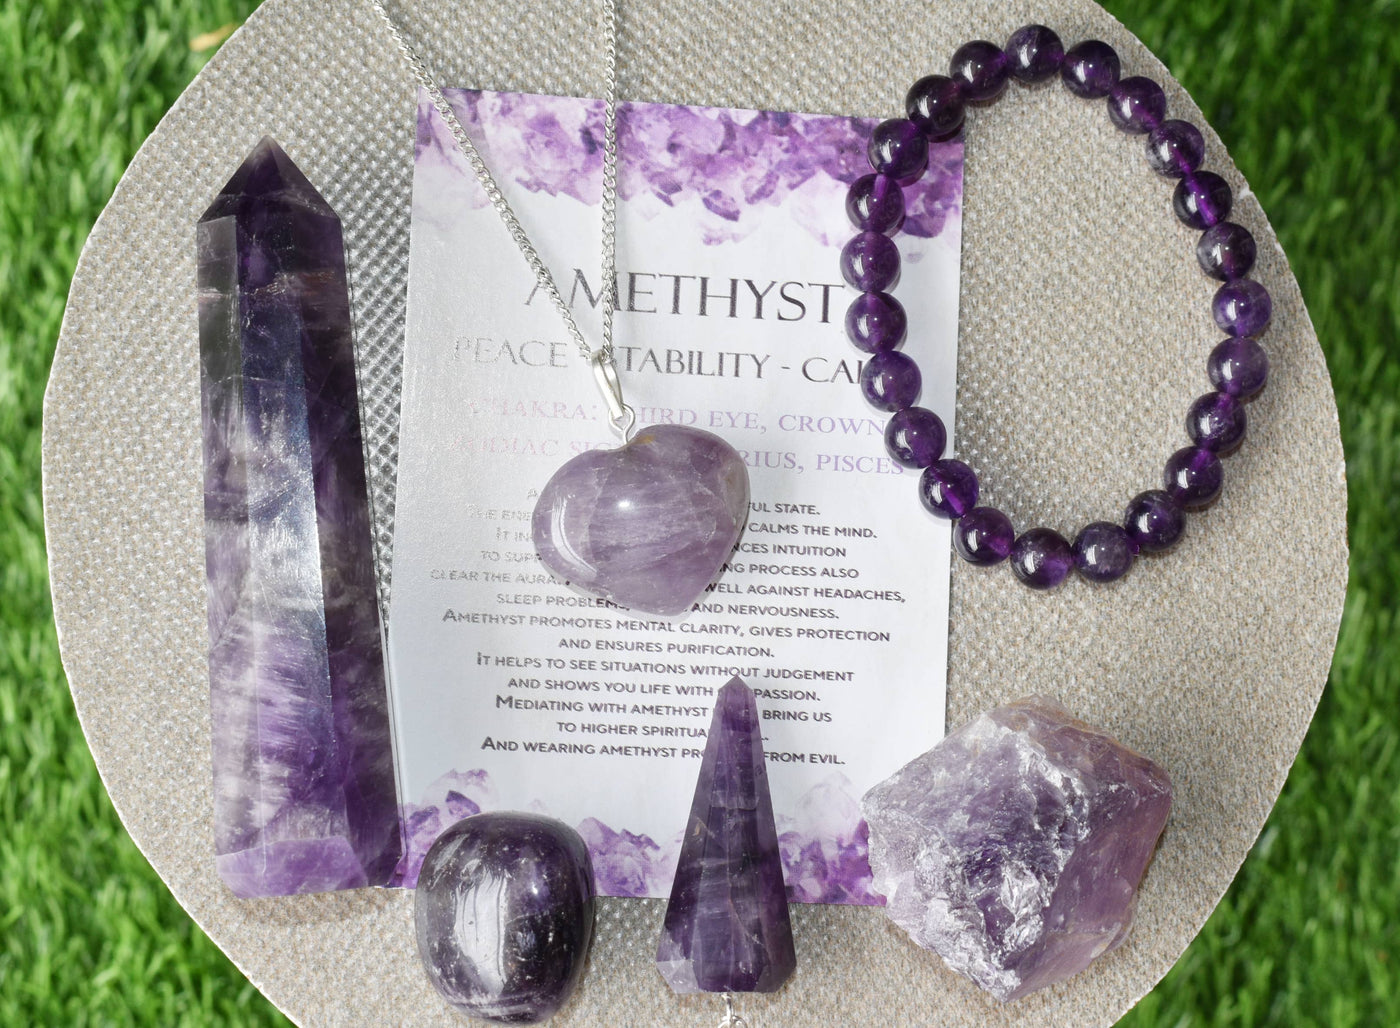 Amethyst Crystal Gift Set For Emotional Support and Protection, Real Polished Gemstones.-gift or crystal beginners. 